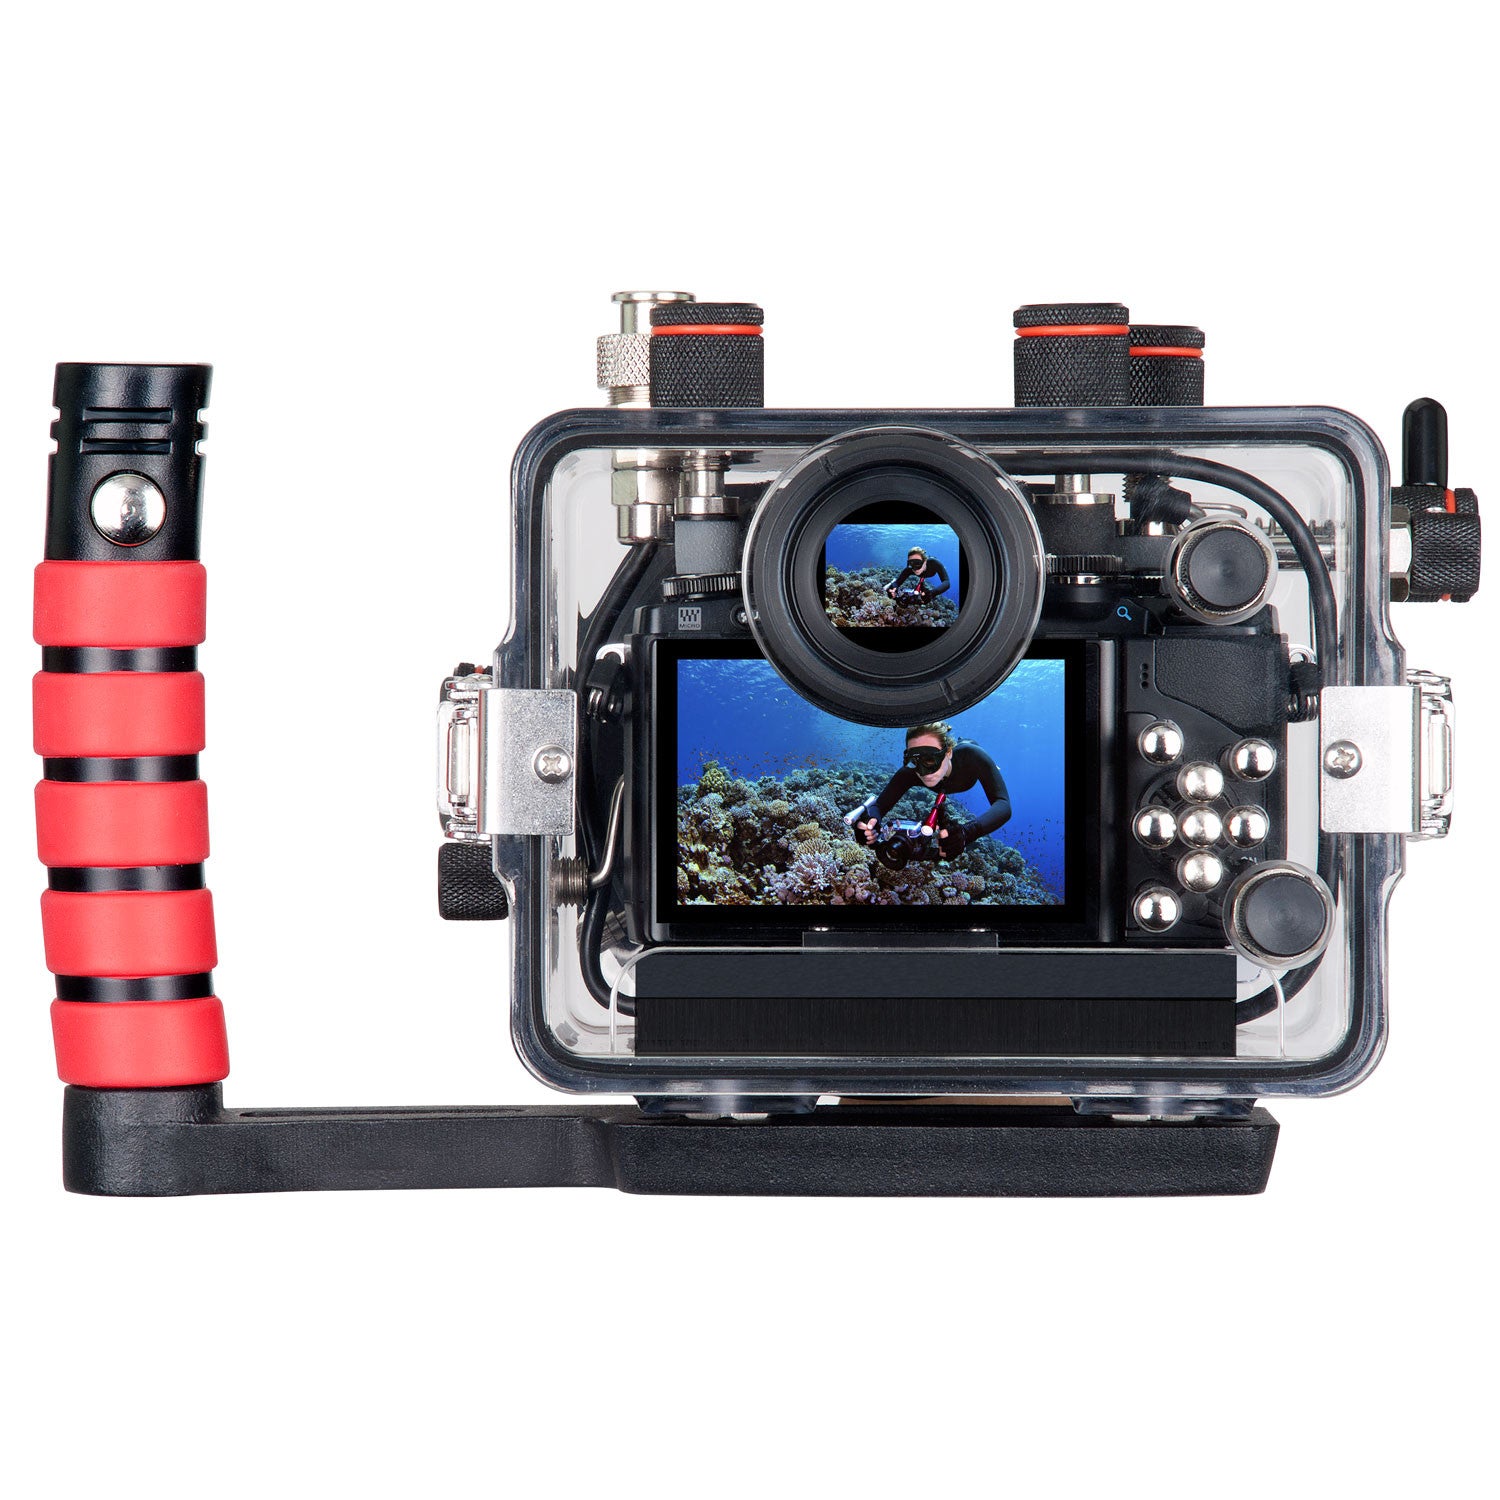 200DLM/A Underwater TTL Housing for Olympus OM-D E-M10 Mirrorless Micro Four Thirds Camera